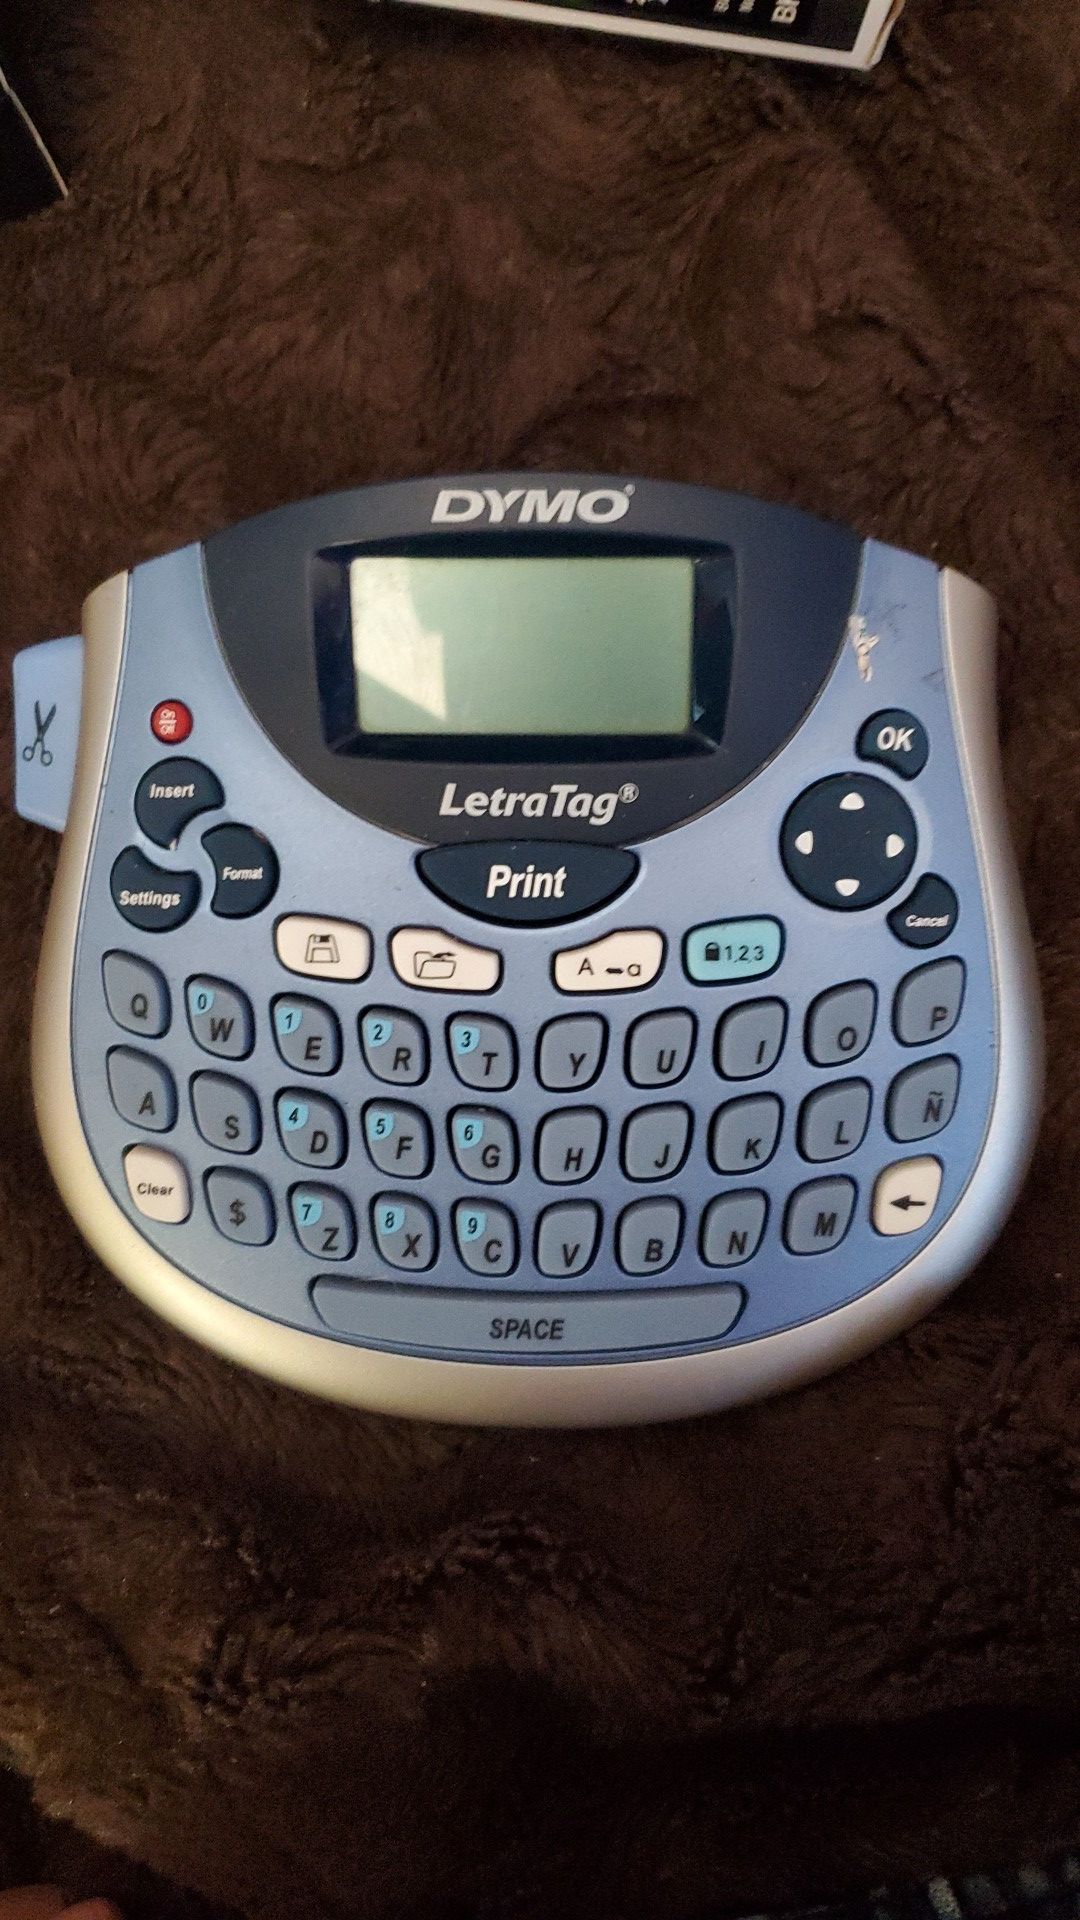 Dymo* Label Maker/Printer "LetraTag" only $15